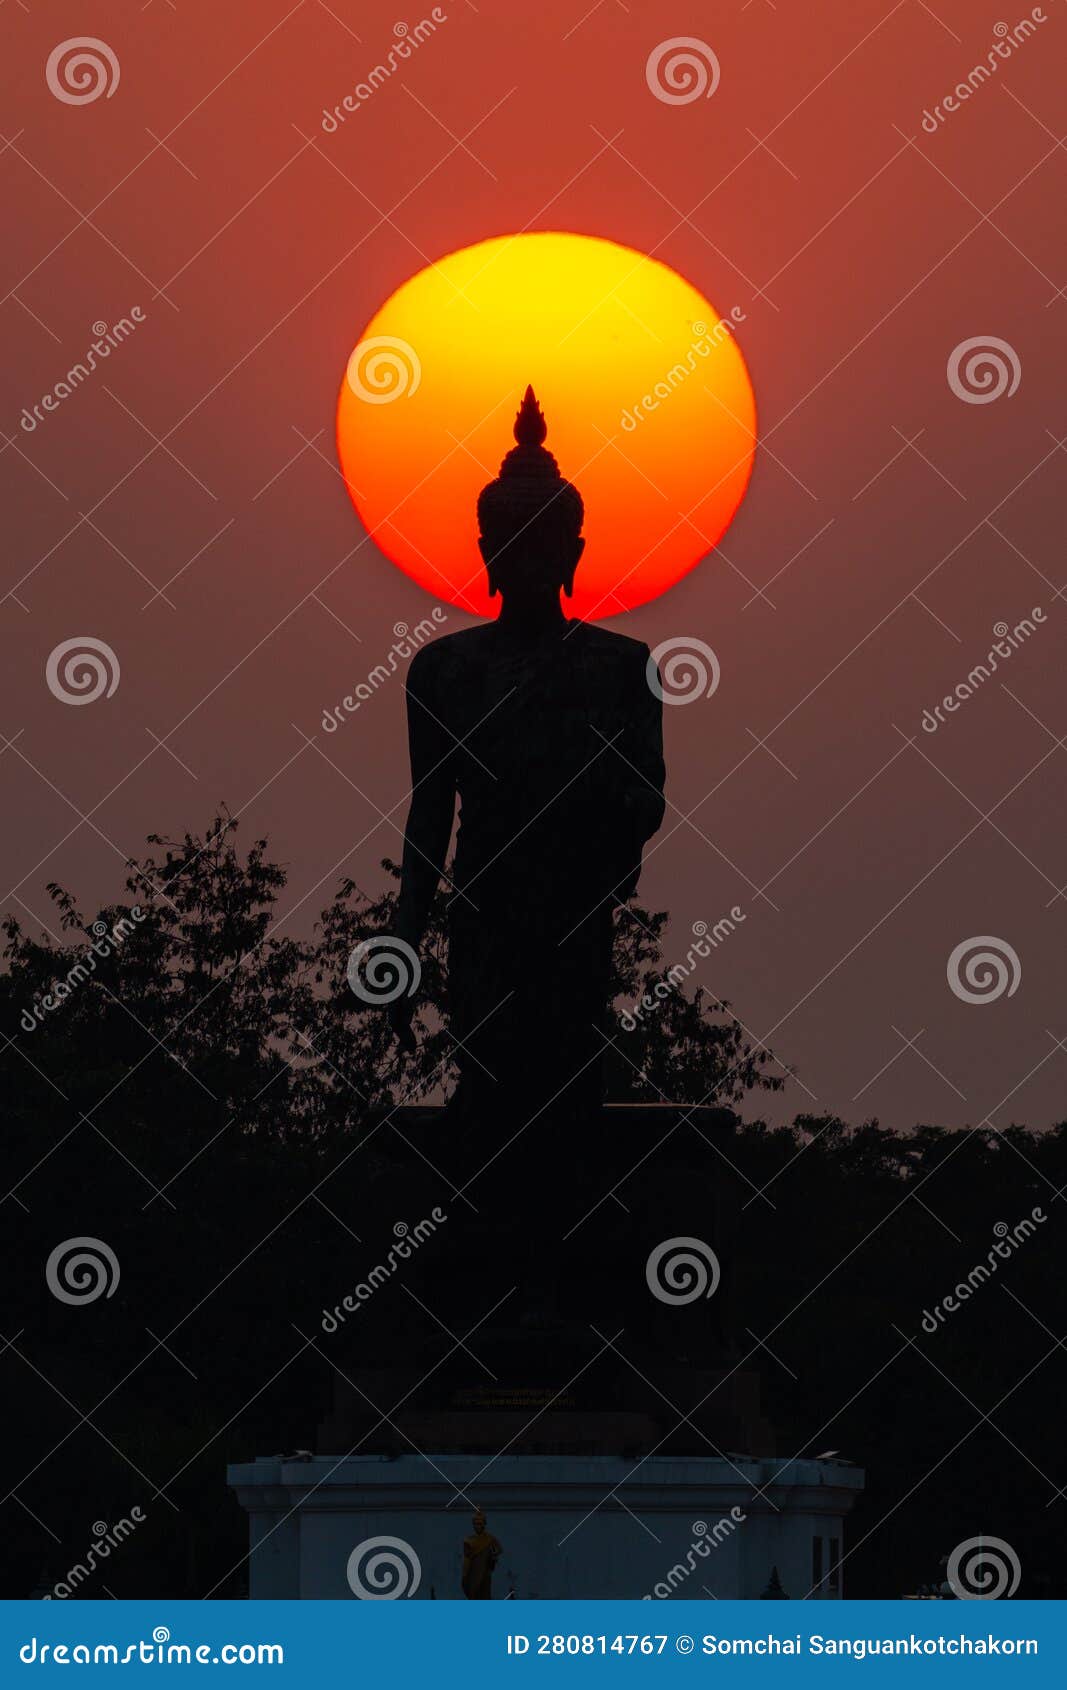 head of statue of buddha image surrounded by sun during sunset